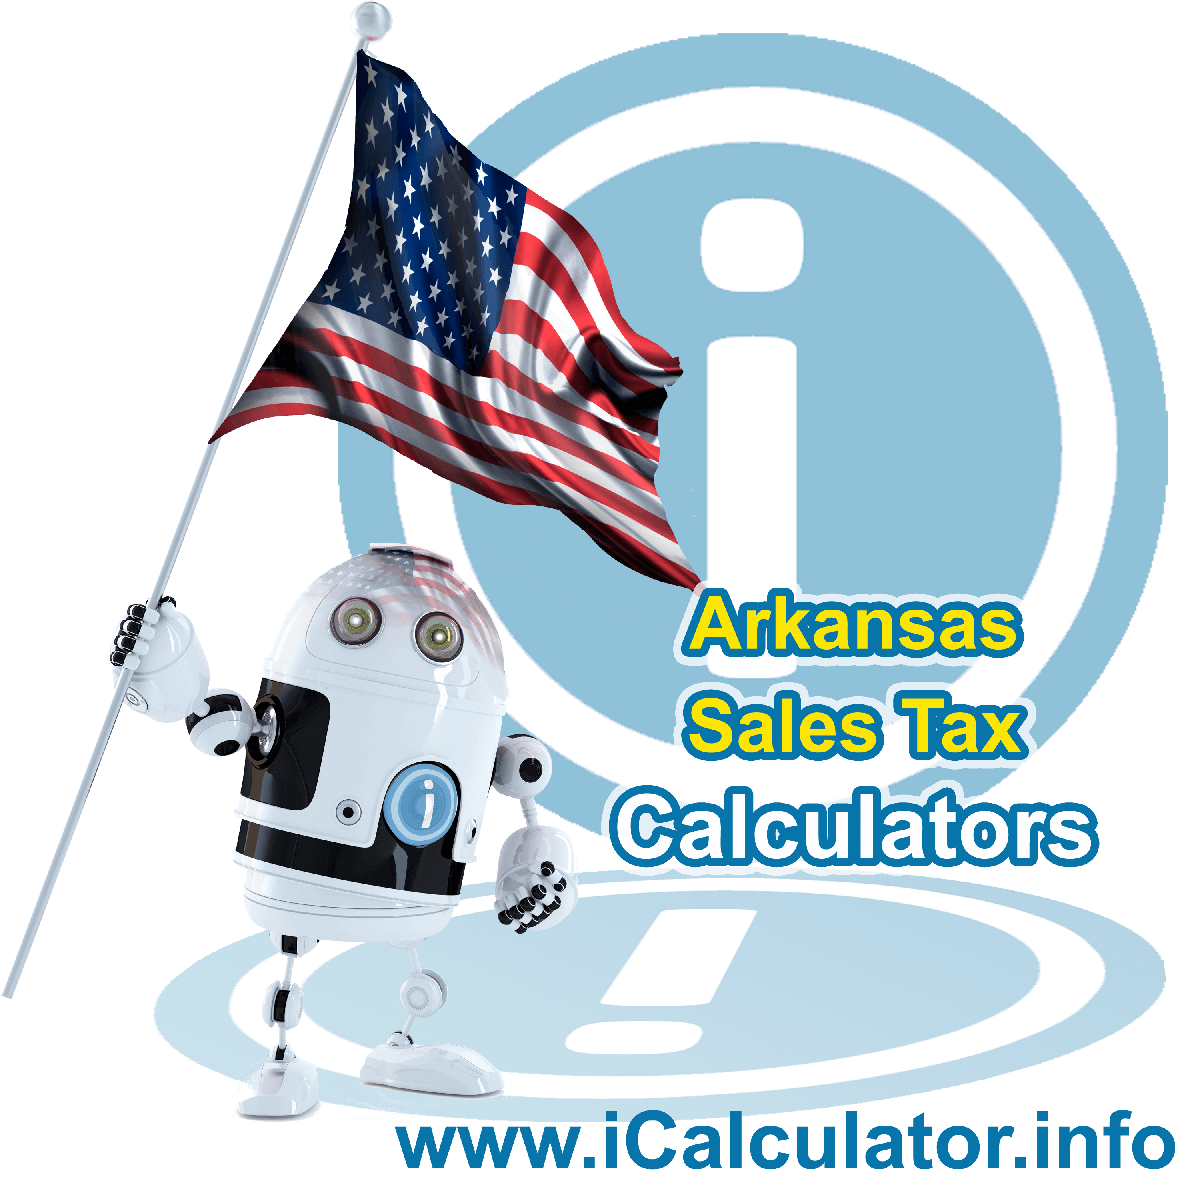 Arkansas Sales Tax Comparison Calculator: This image illustrates a calculator robot comparing sales tax in Arkansas manually using the Arkansas Sales Tax Formula. You can use this information to compare Sales Tax manually or use the Arkansas Sales Tax Comparison Calculator to calculate and compare Arkansas sales tax online.